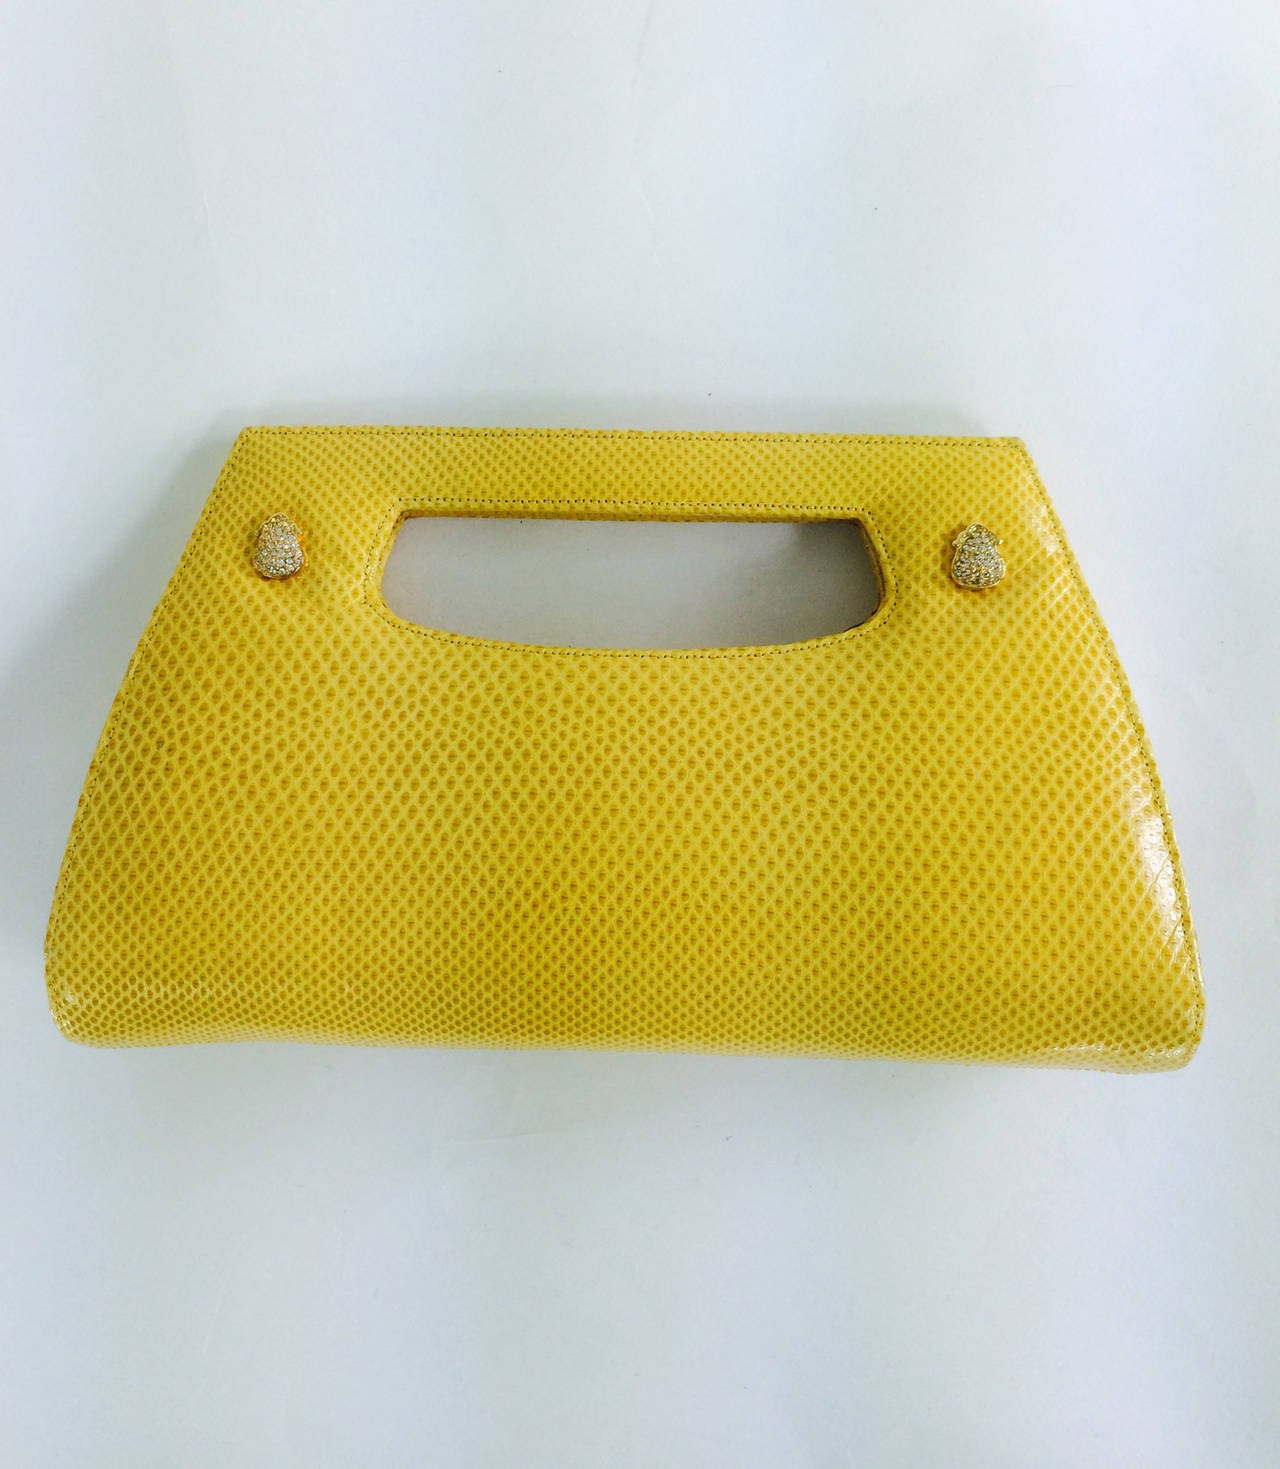 Judith Leiber bright yellow karung leather structured handle handbag...Perfect for evening & cocktails...The bag has a set in handle...Two Swarovski crystal appliques are set on either side of the handle at the front...The bag closes with hidden